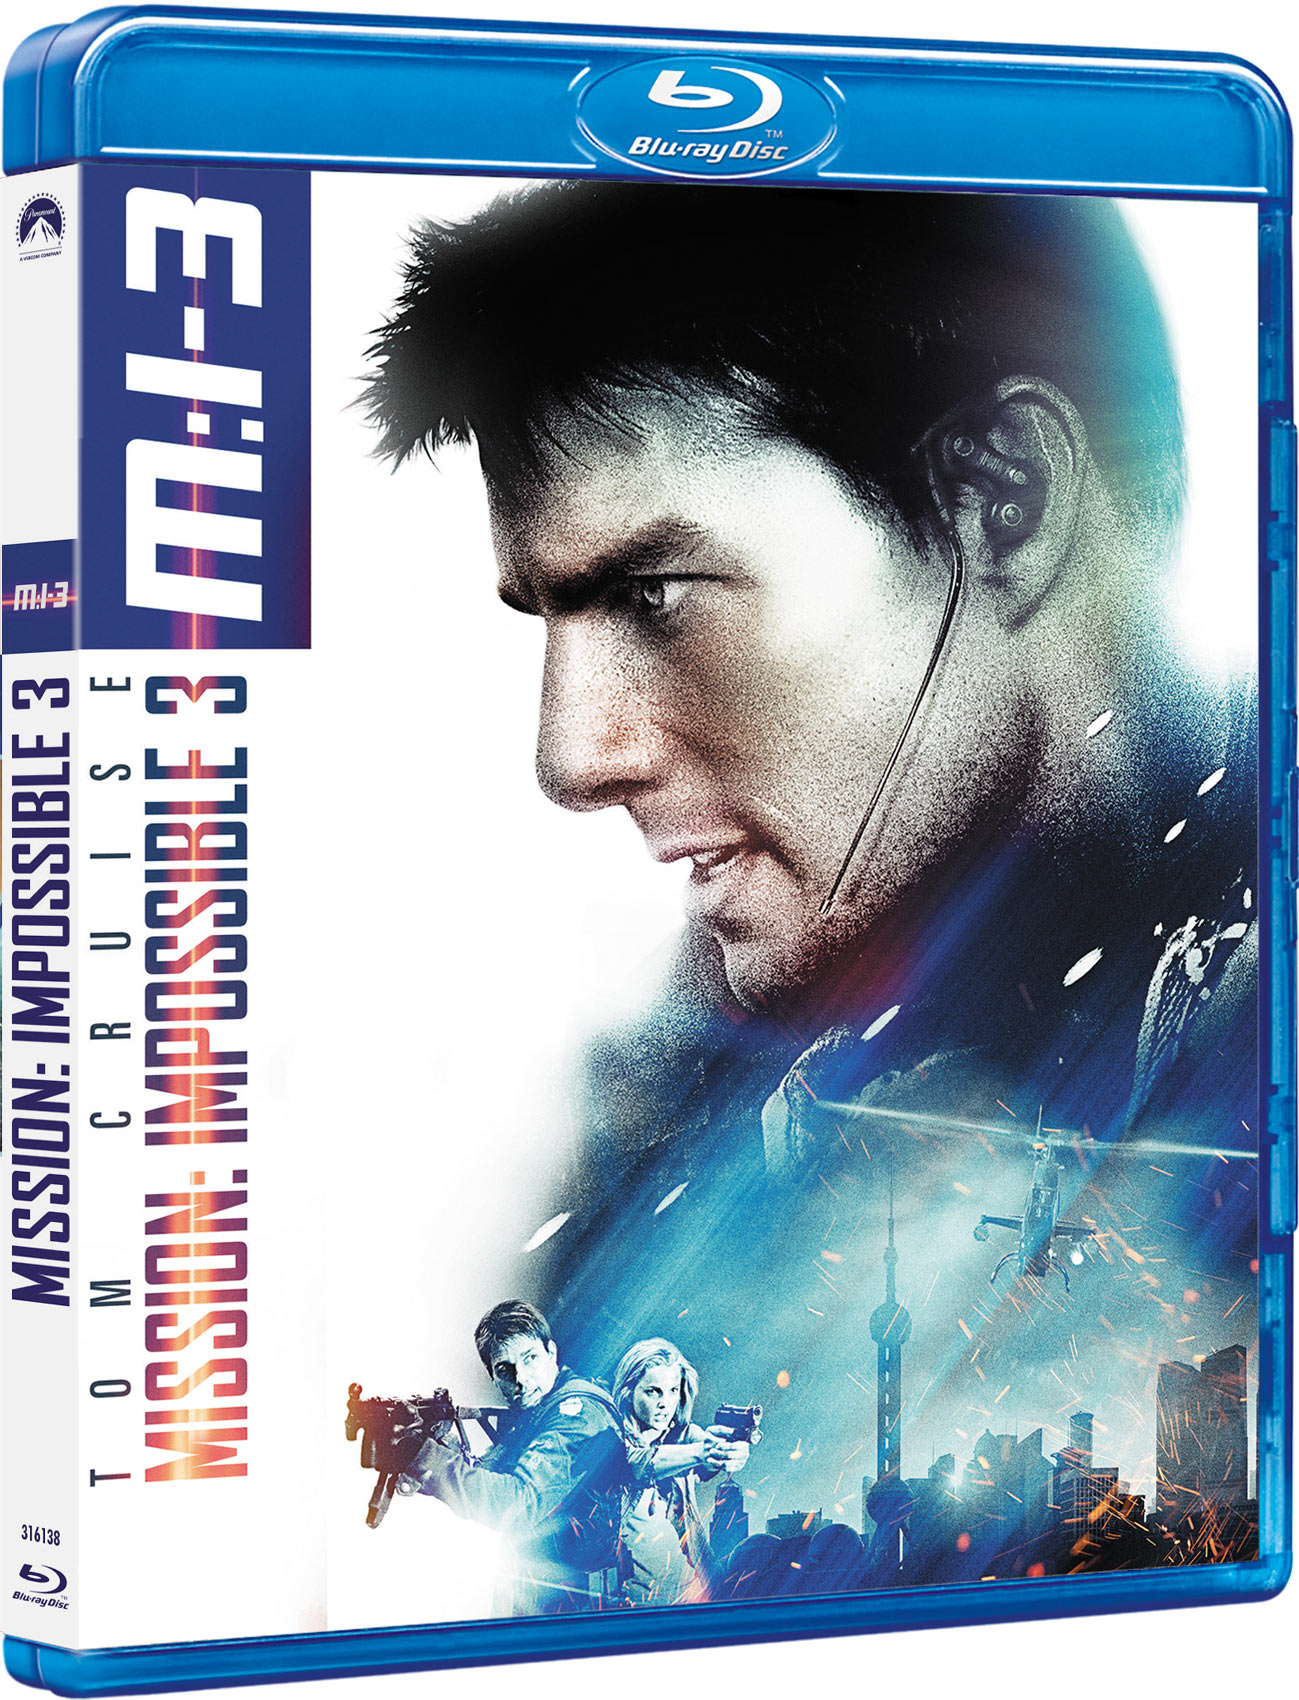 MISSION IMPOSSIBLE III BRD